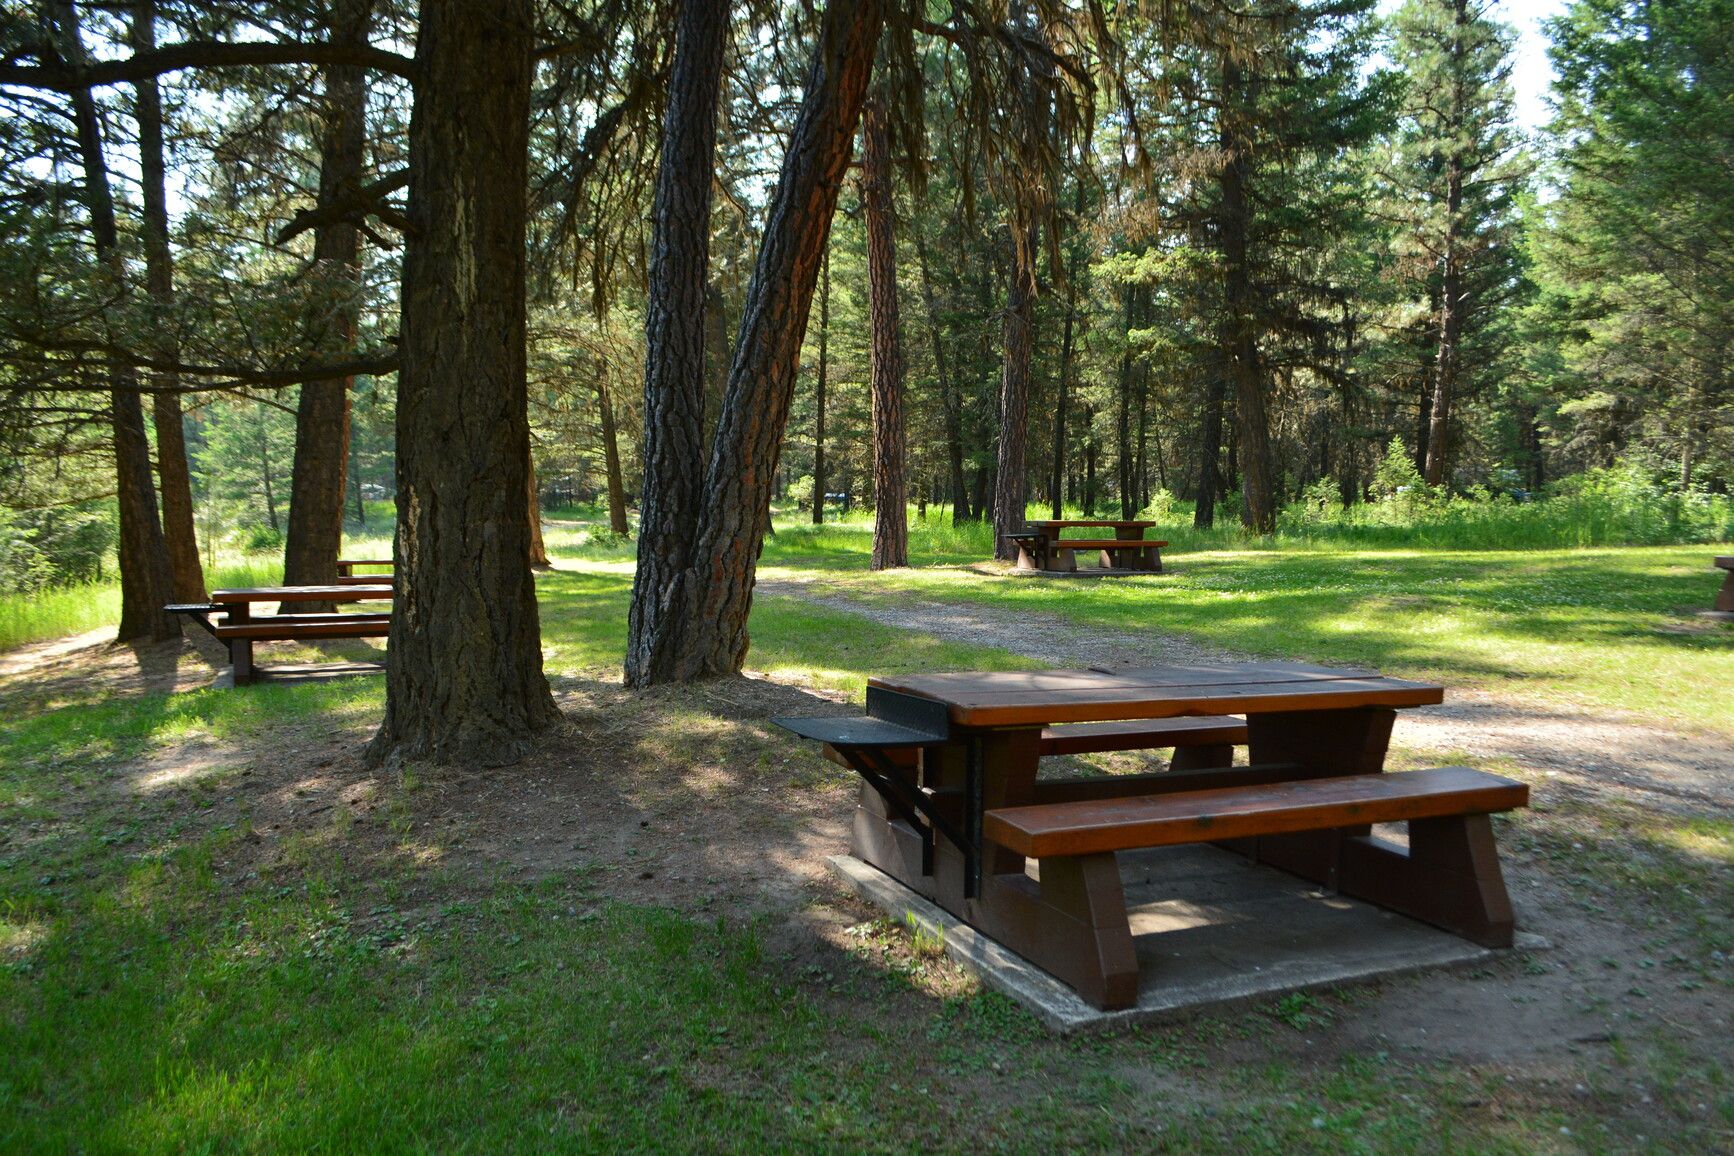 Relax in the shaded day-use area of Kikomun Creek Park, offering plenty of picnic tables for get togethers.